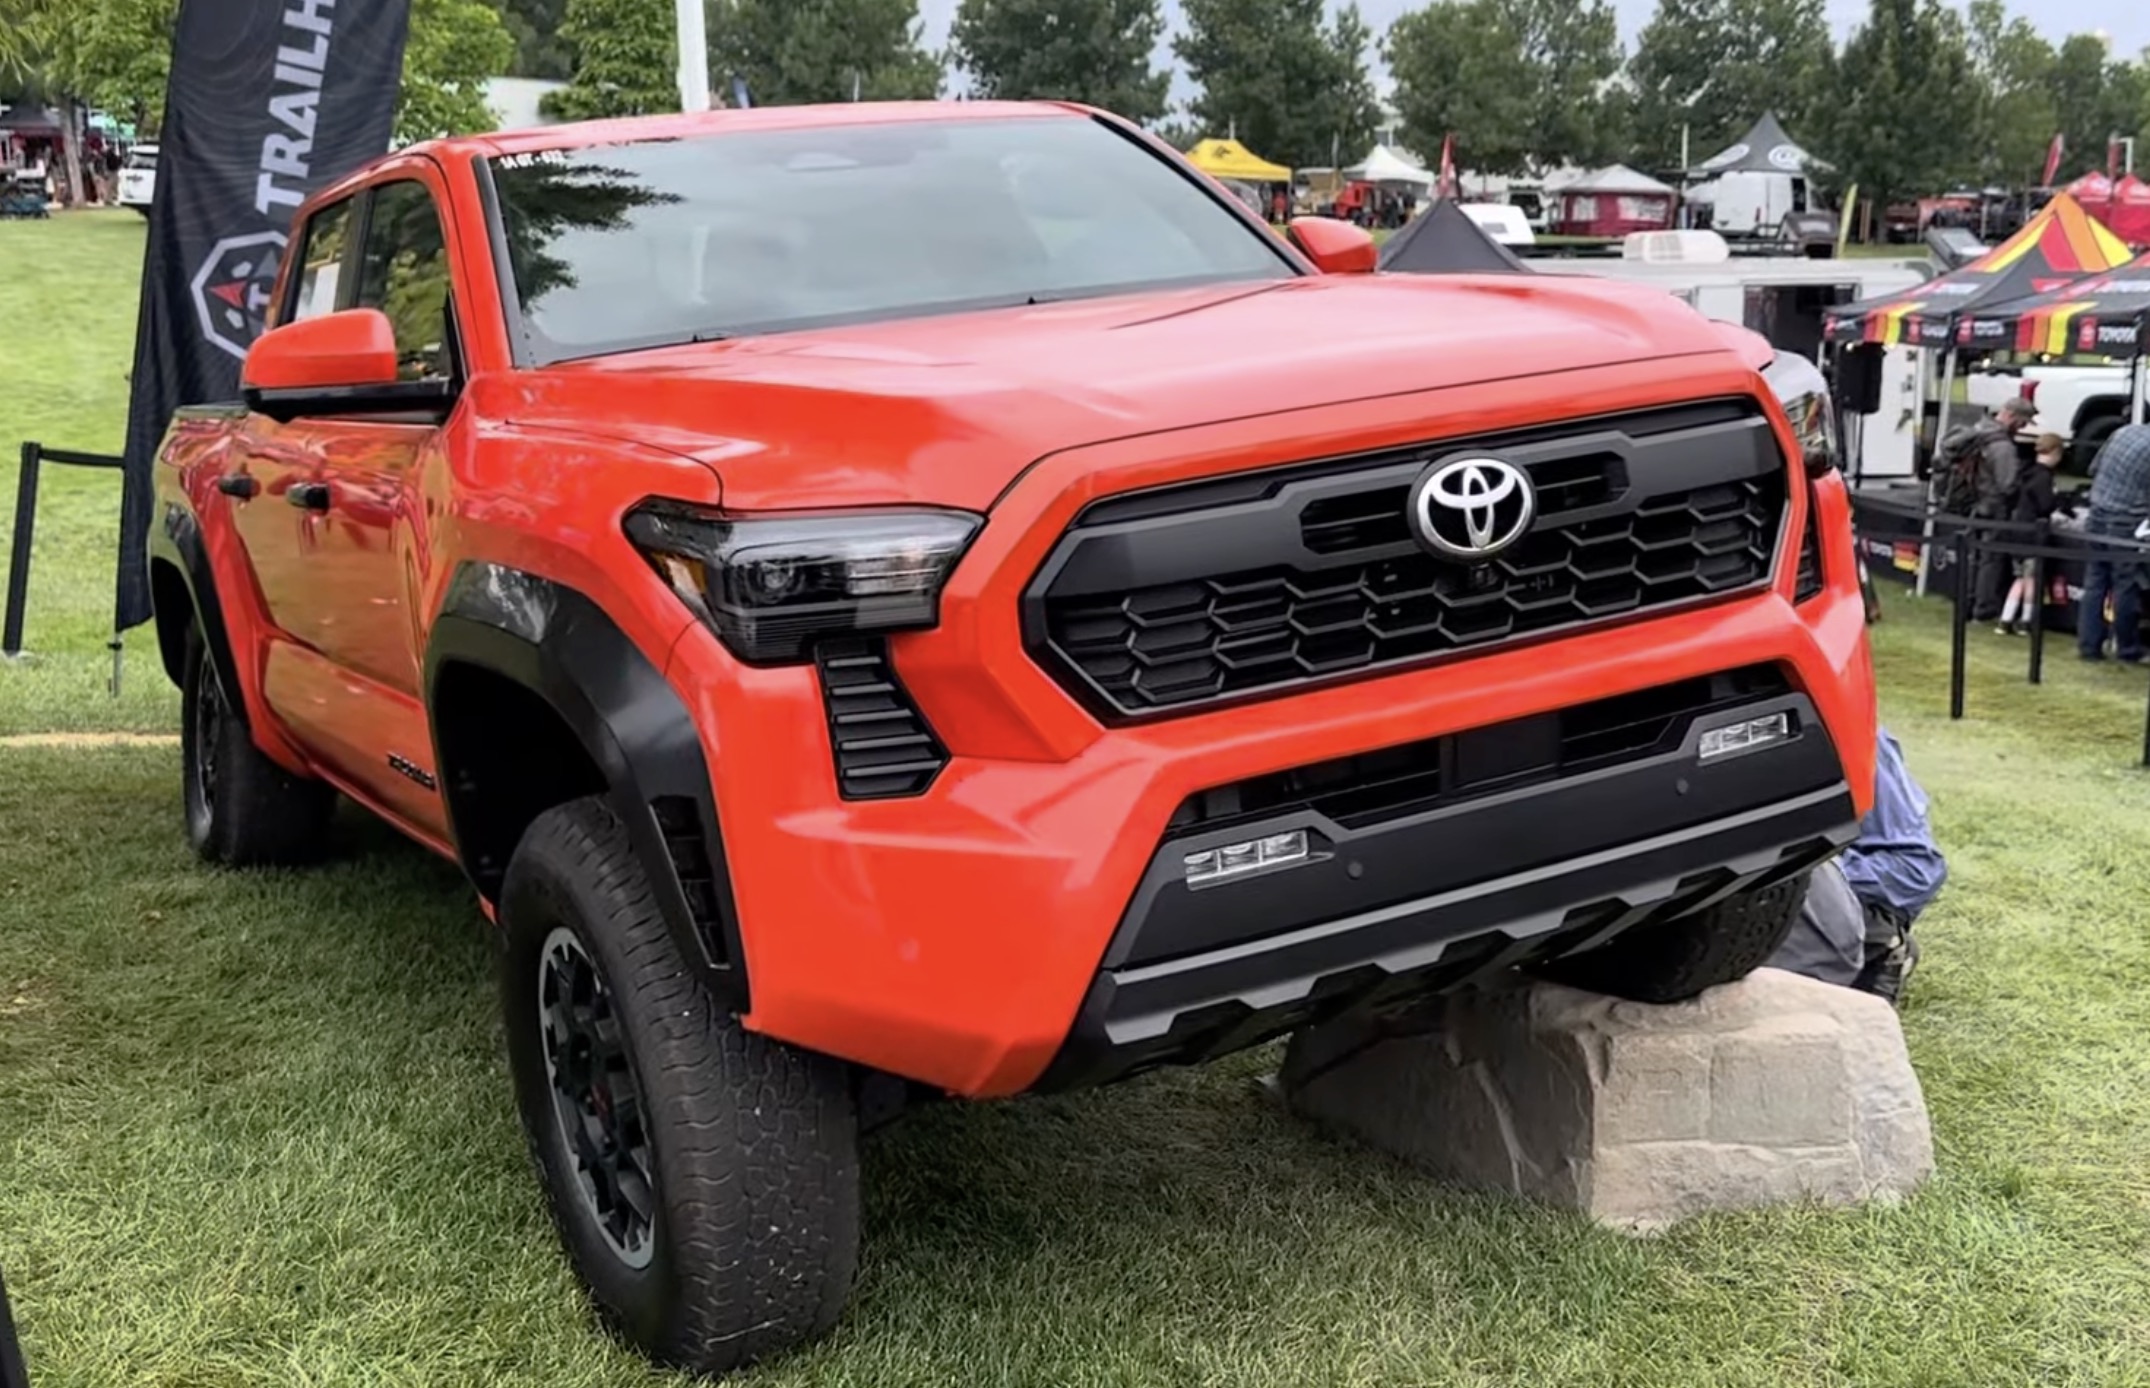 2024 Tacoma 2024 Tacoma TRD Off-Road has first official public reveal @ Overland Expo! [Videos + Photos] solar-octane-2024-tacoma-trd-off-road-1-